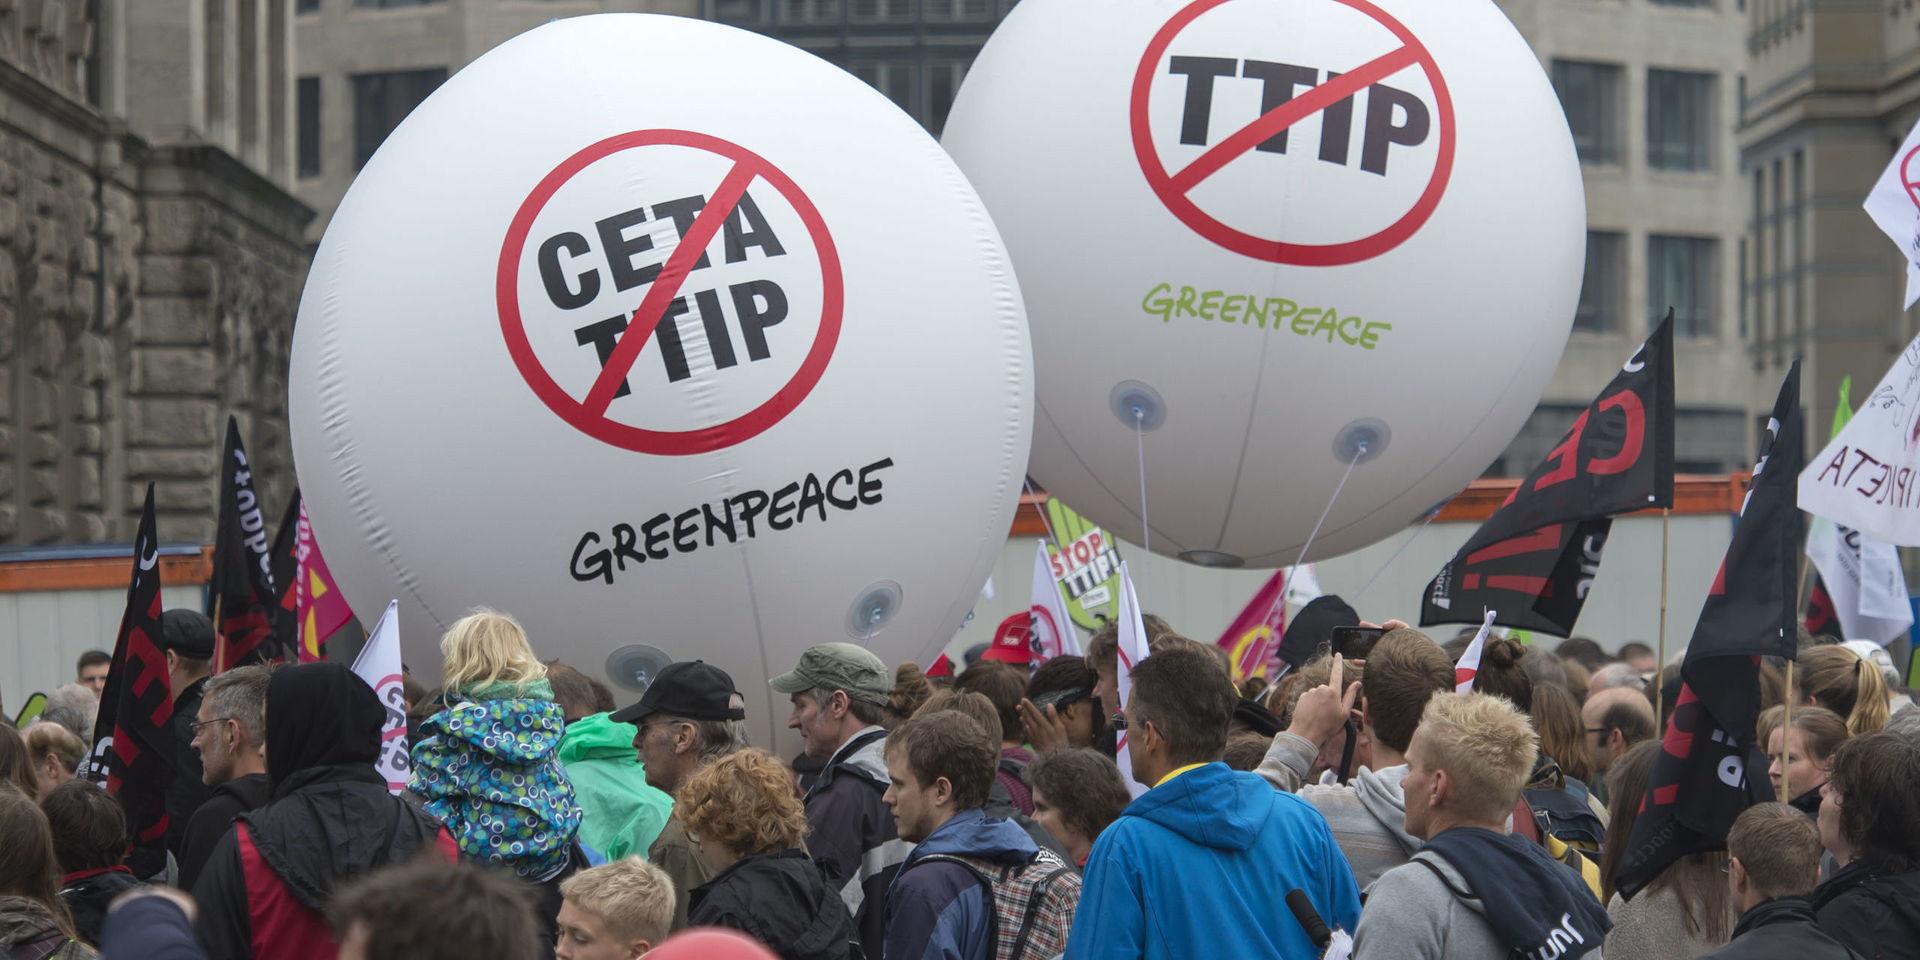 People demonstrate against the TTIP and CETA trade agreements in Leipzig, Germany, Saturday, Sept. 17, 2016. Thousands of people are rallying in cities across Germany to protest against planned European Union trade deals with the United States and Canada.